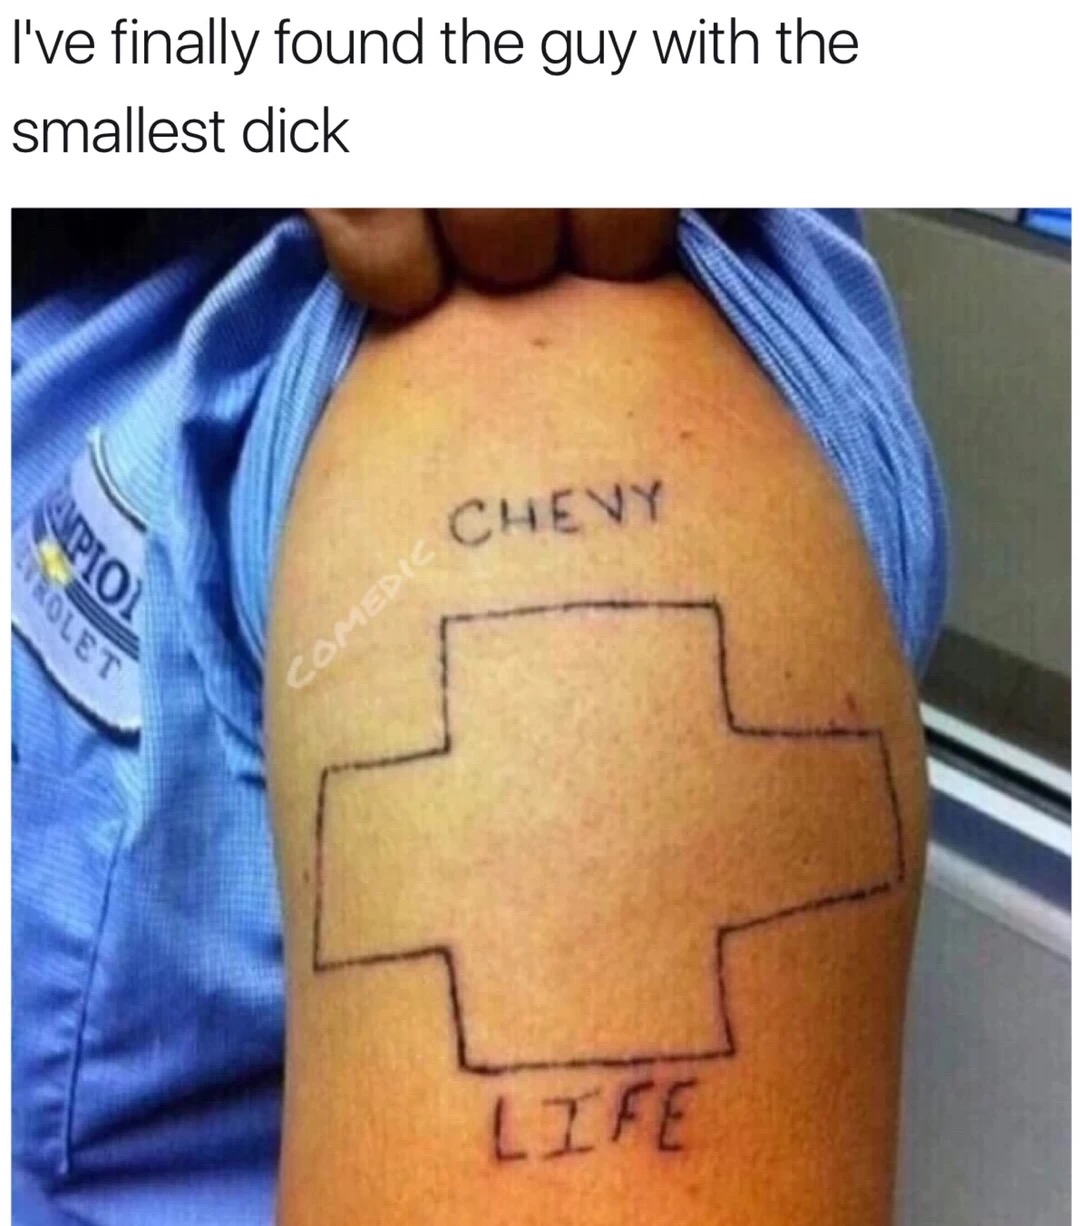 Funny meme about the man with a Chevy logo tattoo on his arm.